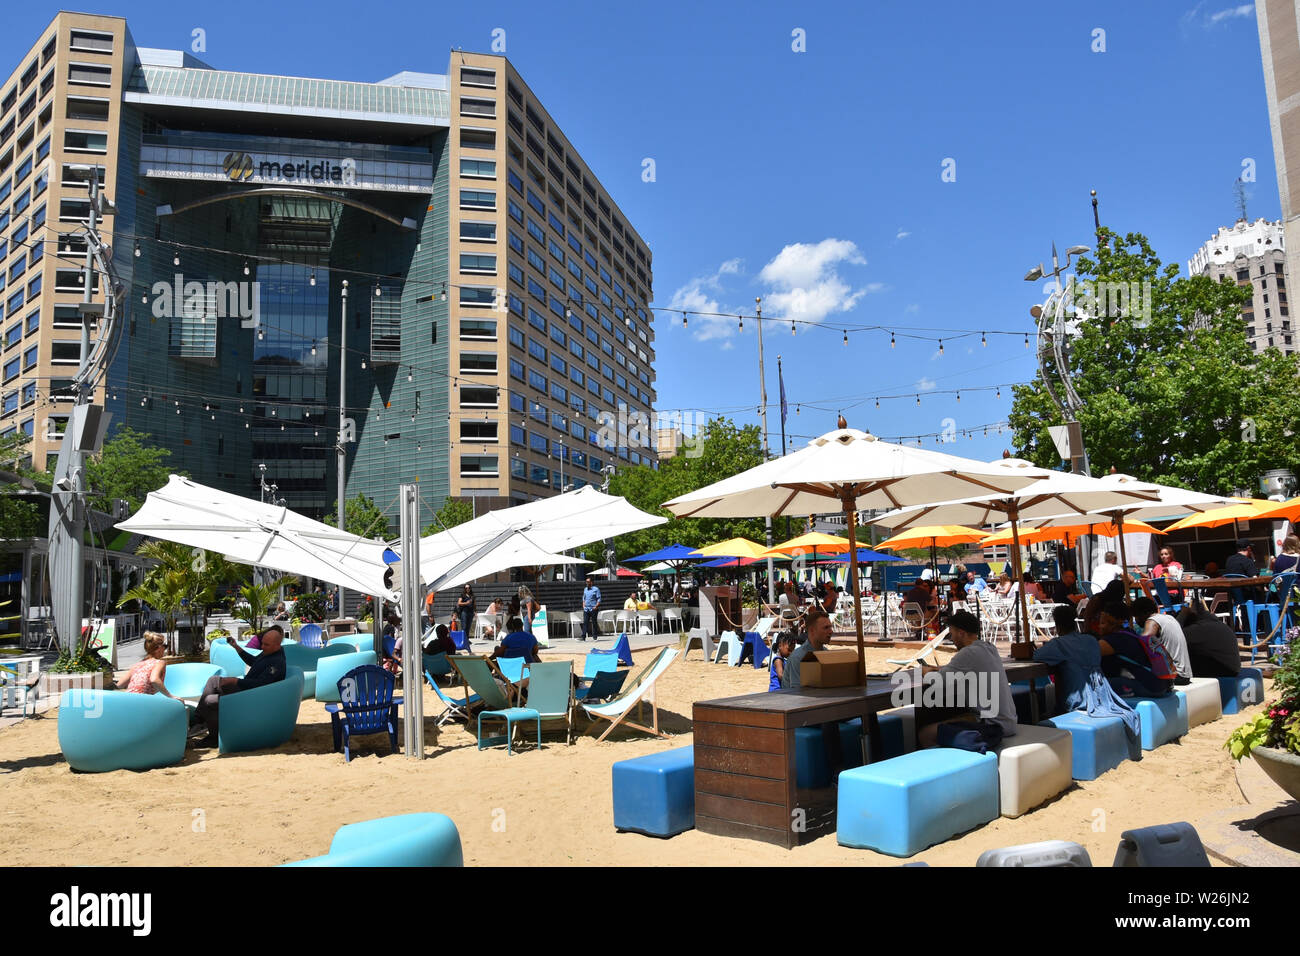 DETROIT, MI / USA - JUNE 30, 2019:  People enjoying a sunny day in Campus Martius park. Stock Photo